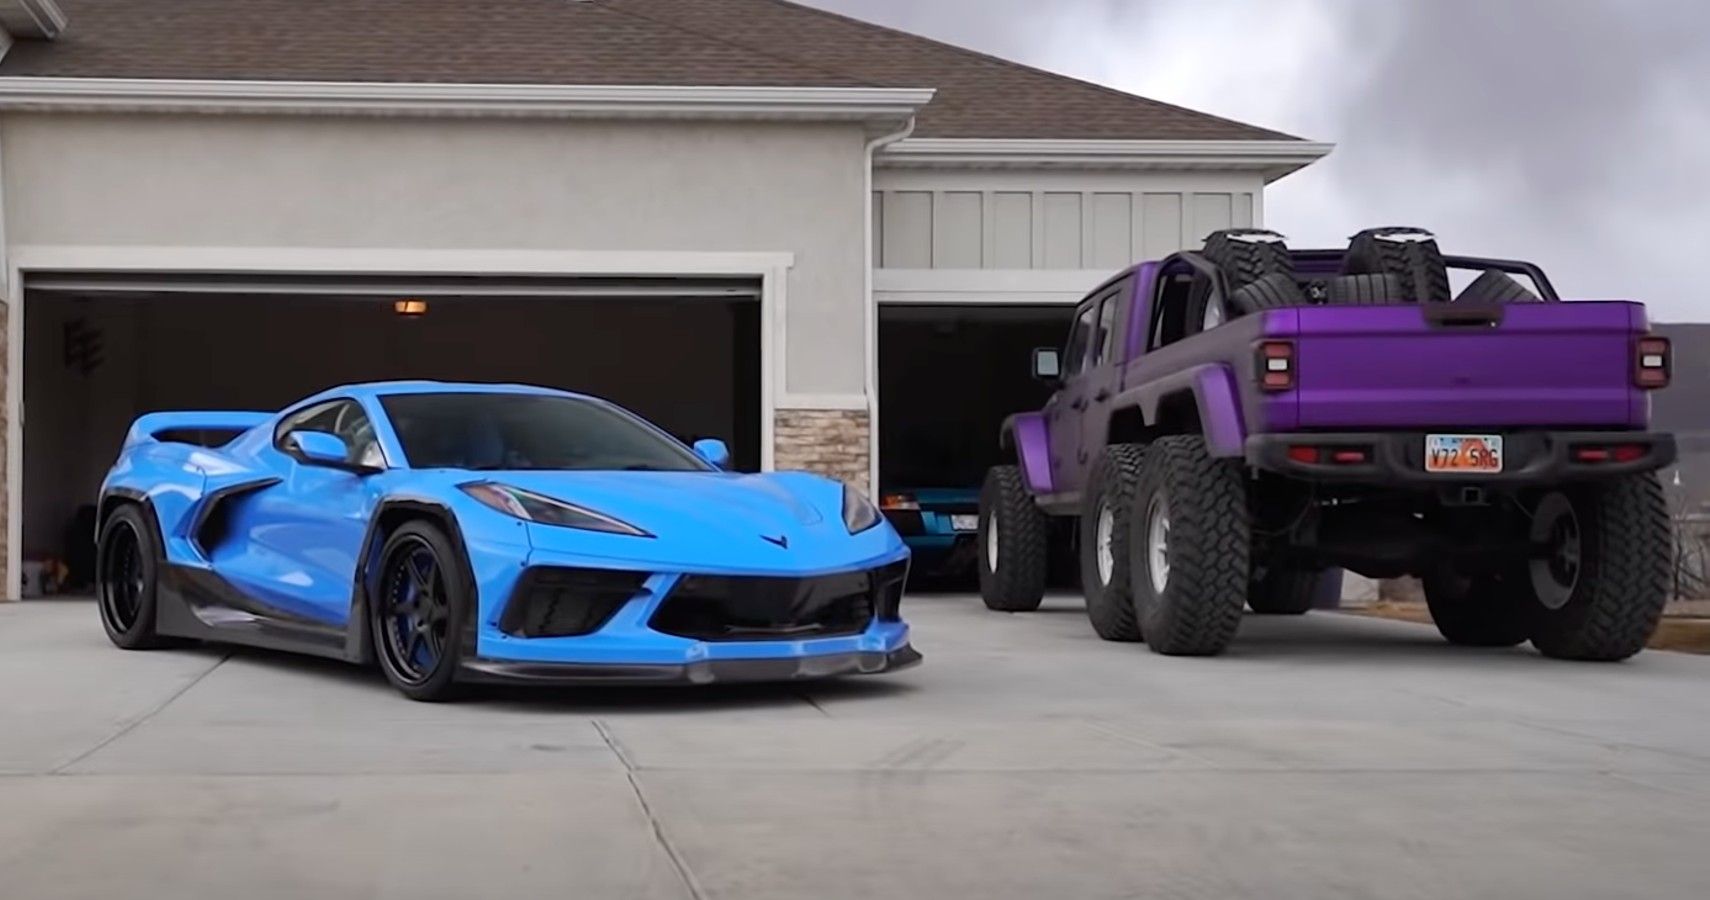 Introducing Thestradmans Chevrolet Corvette C8 With A Widebody Kit